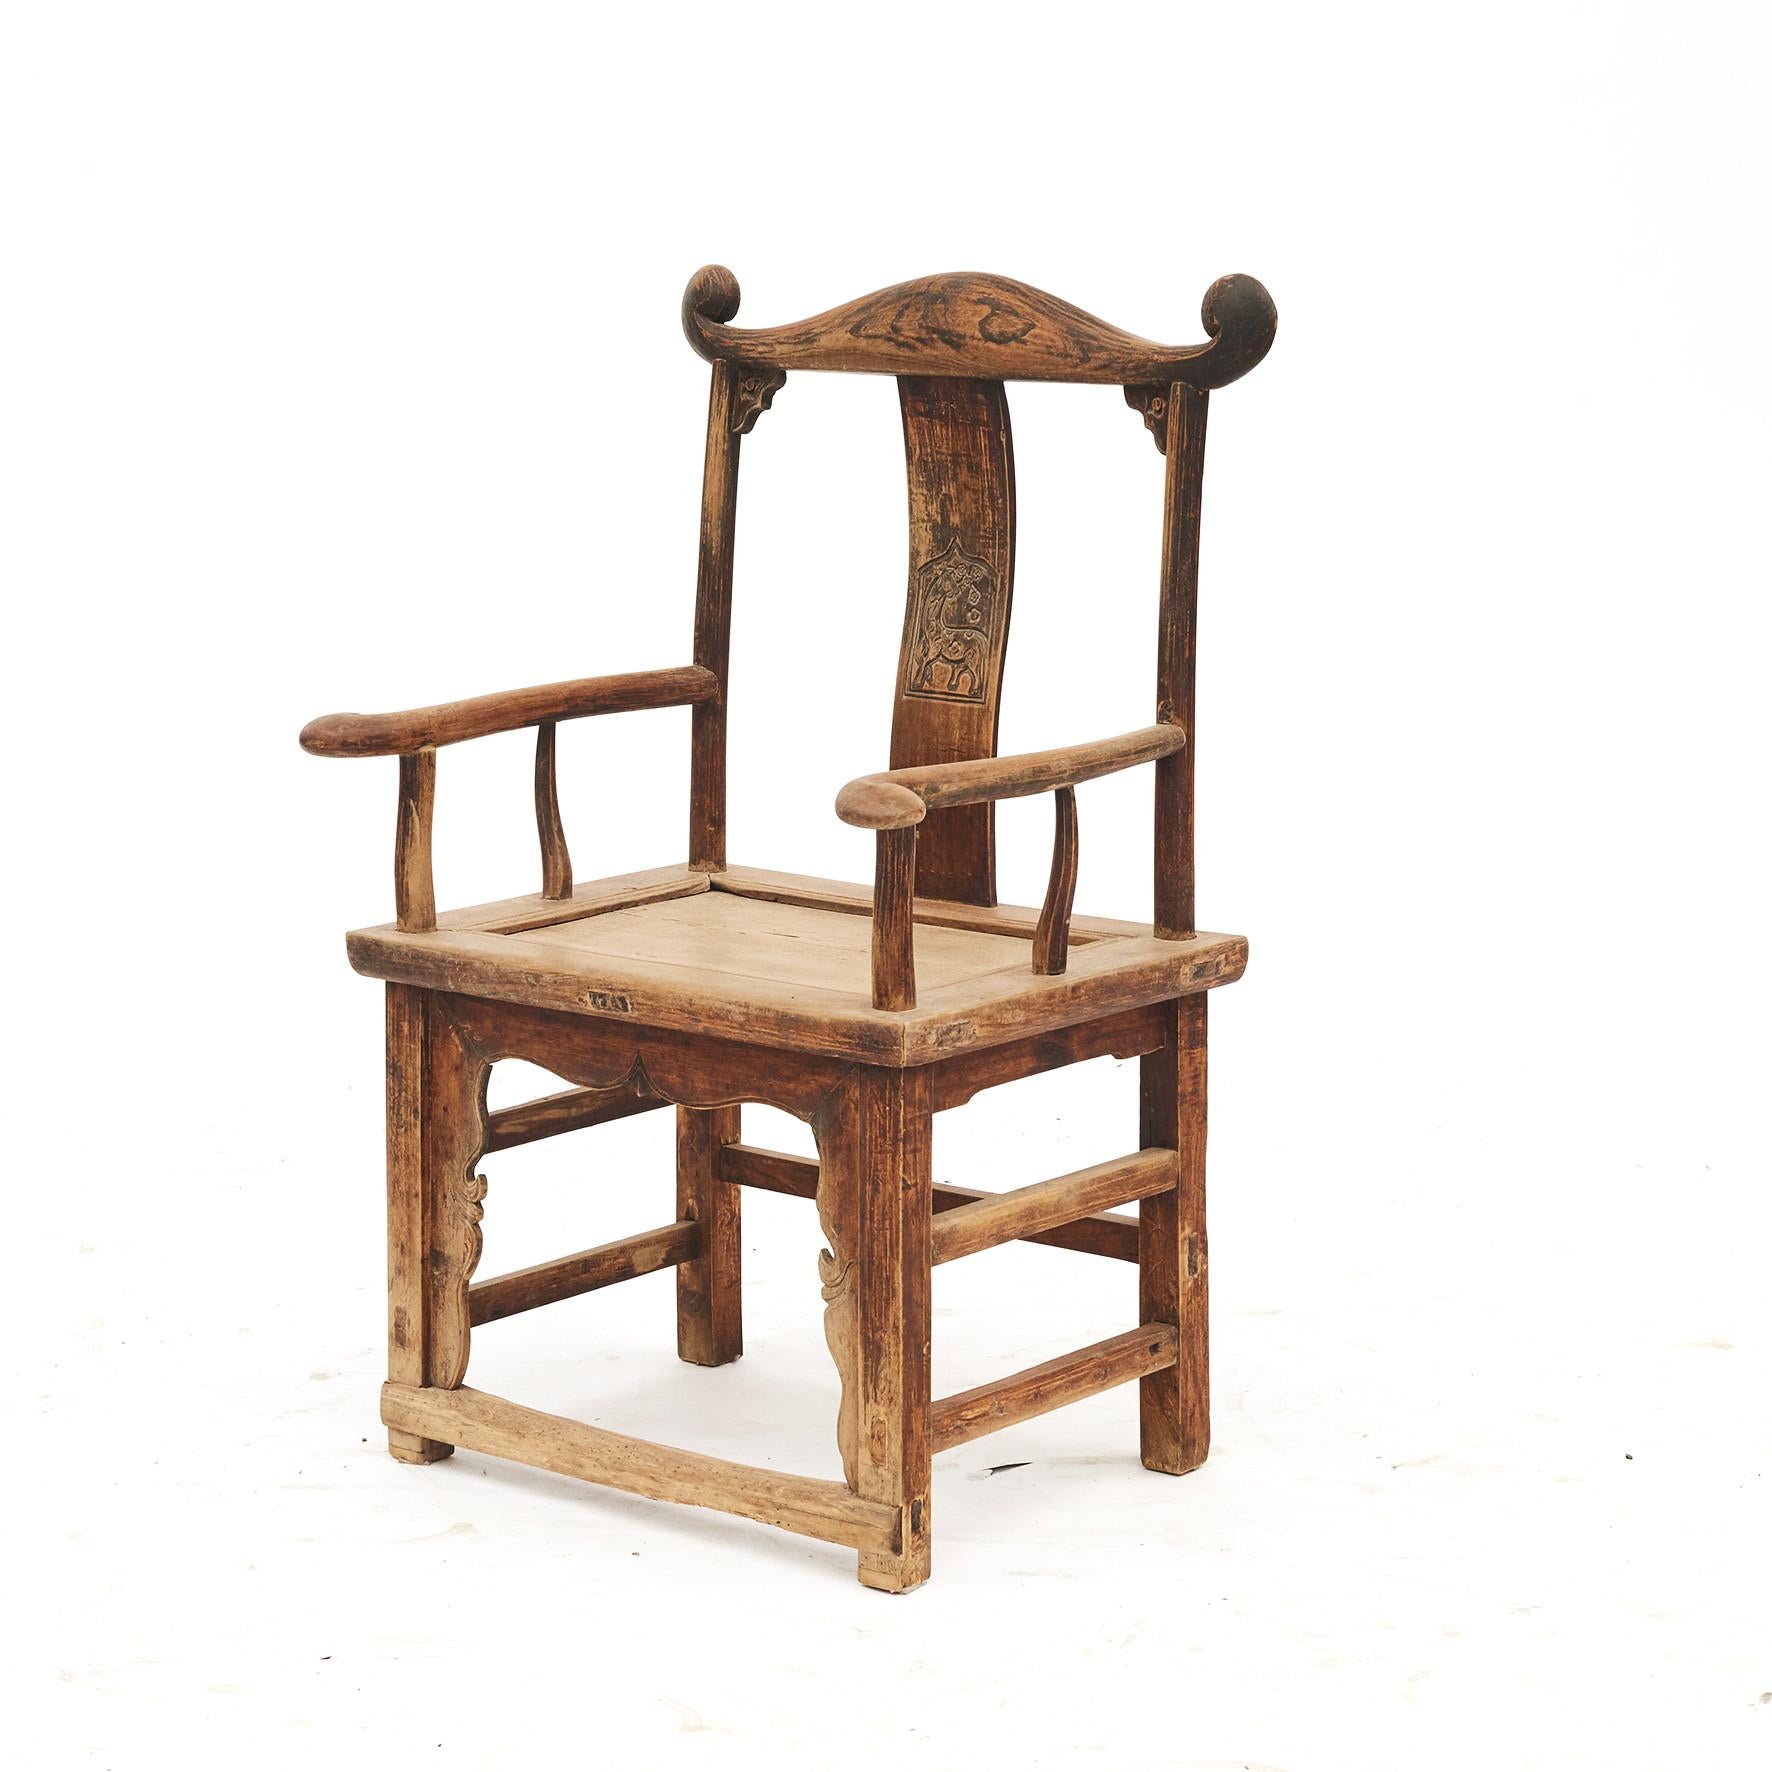 A pair of Chinese official's hat armchairs from the early 19th century. Also referred to as Yoke back chairs.
From Shanxi, China and dates to the early 19th century.
Elmwood with a beautifully aged patina. Carvings of a horse on the